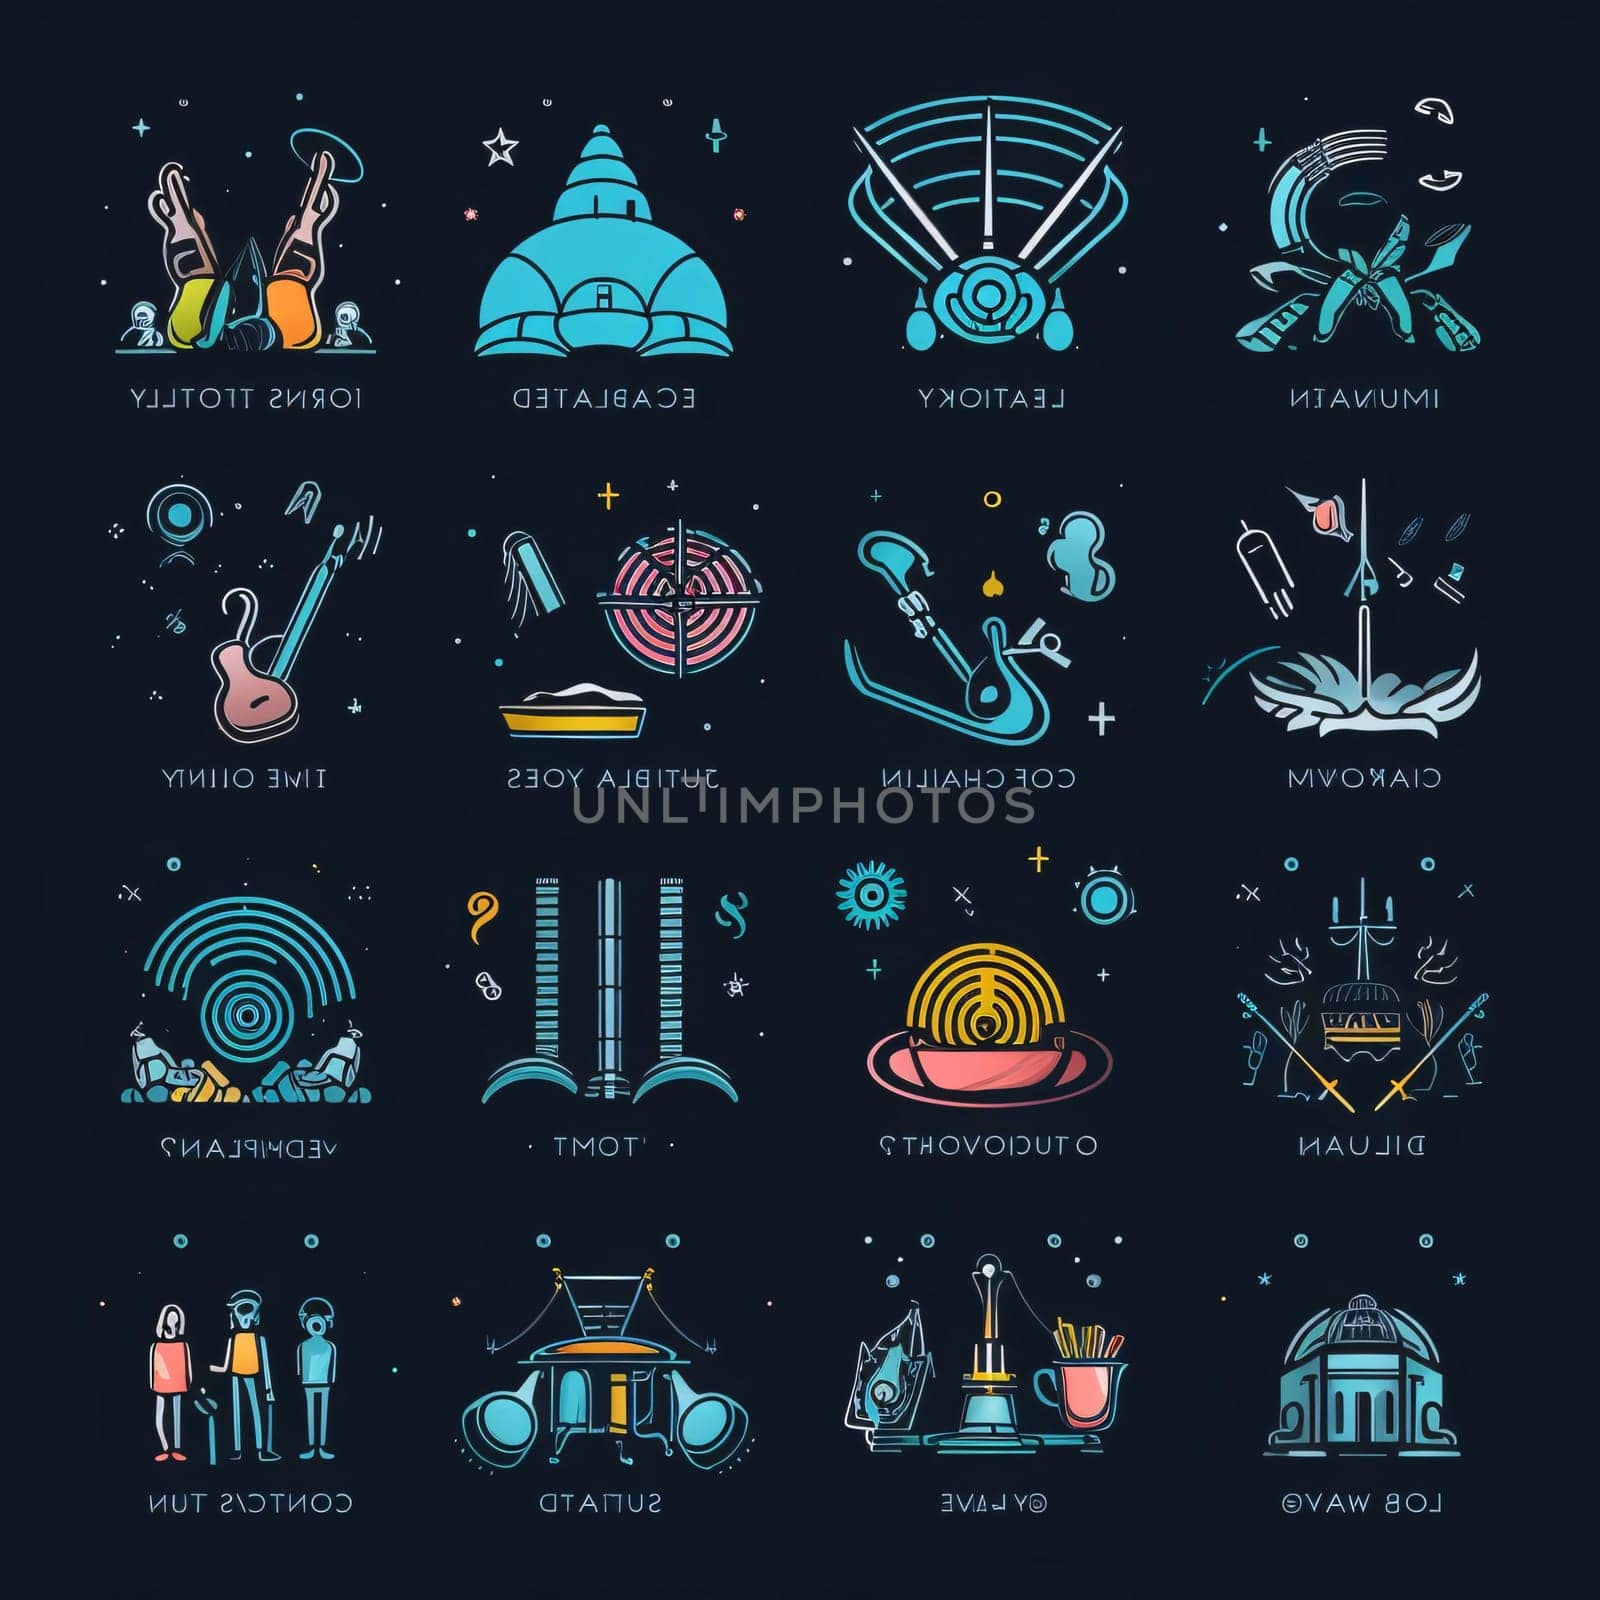 New icons collection: Set of vector linear icons on the theme of travel and tourism.